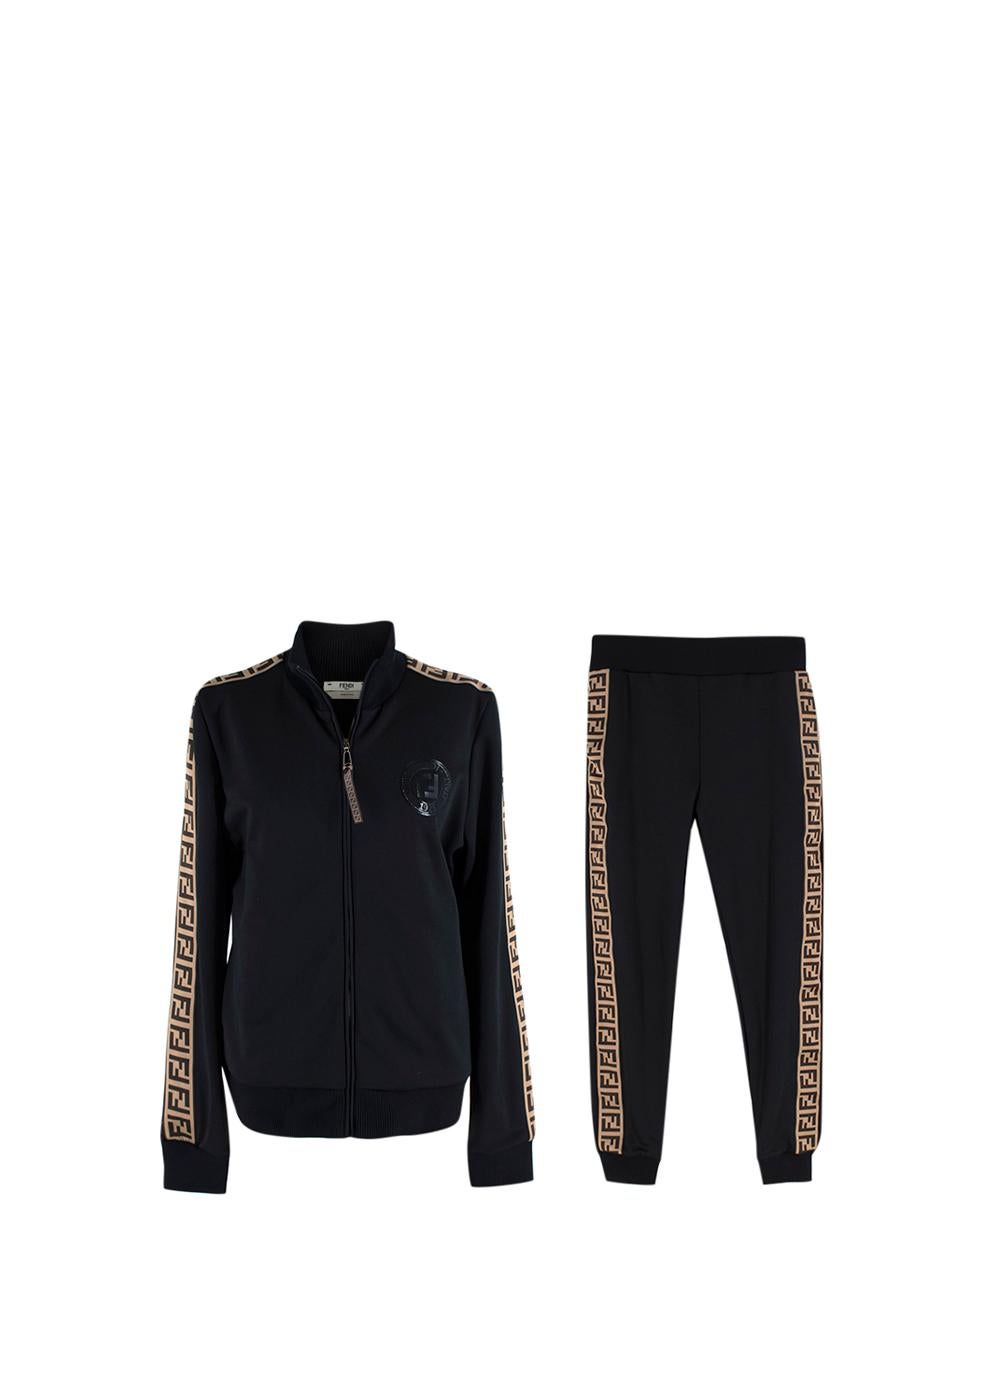 Fendi Black FF Trimmed Track Jacket & Joggers

- Matching track jacket and taped joggers in a black stretch knit 
- FF side stripes adorn the jacket sleeves and trouser edges
- Funnel neck track jacket, with zip-through opening, and ribbed collar,